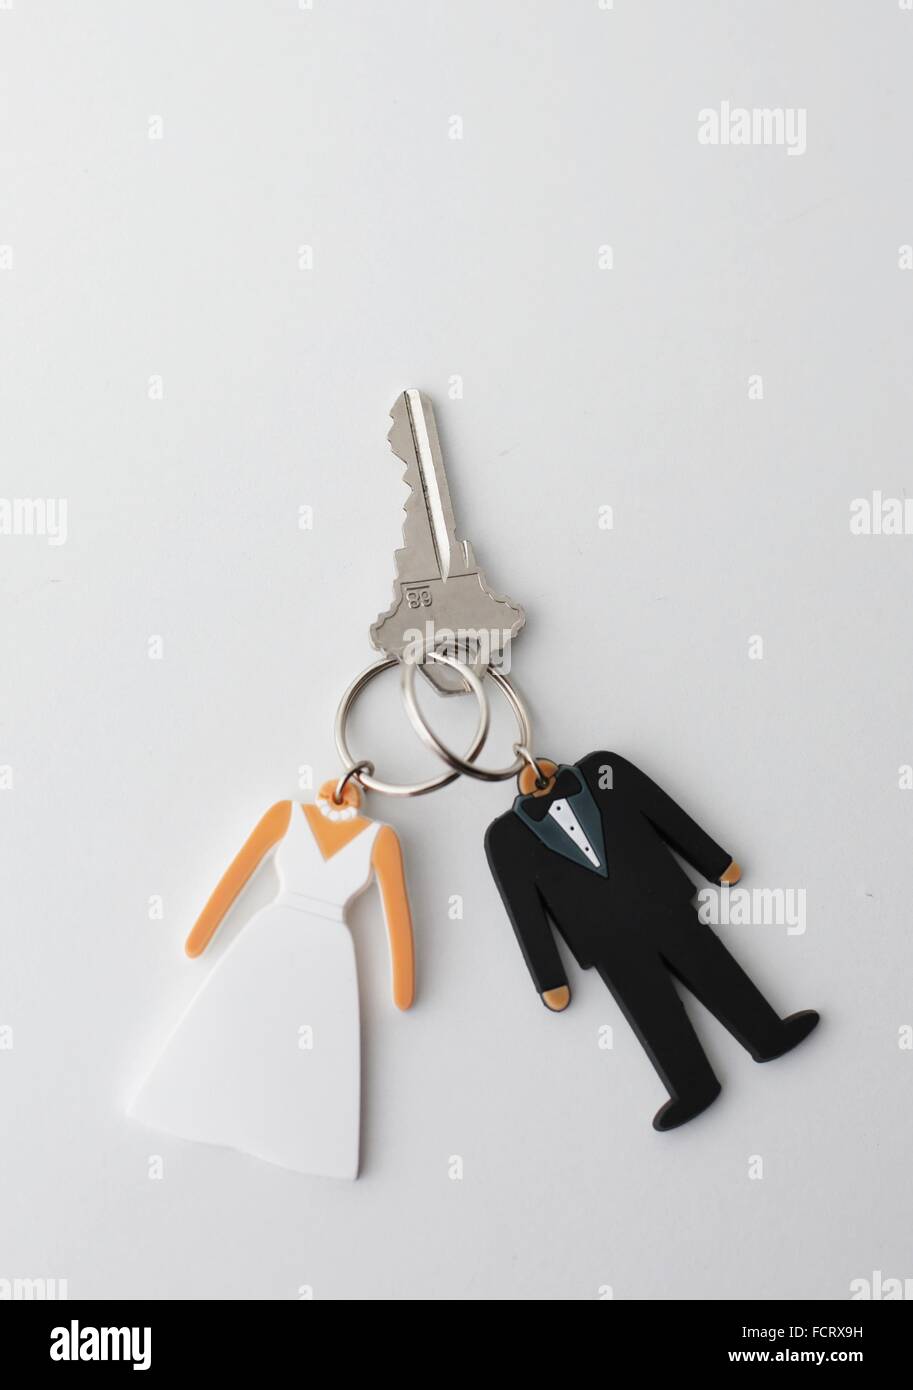 Bride And Groom Key Rings Sharing One Key Stock Photo 93953261